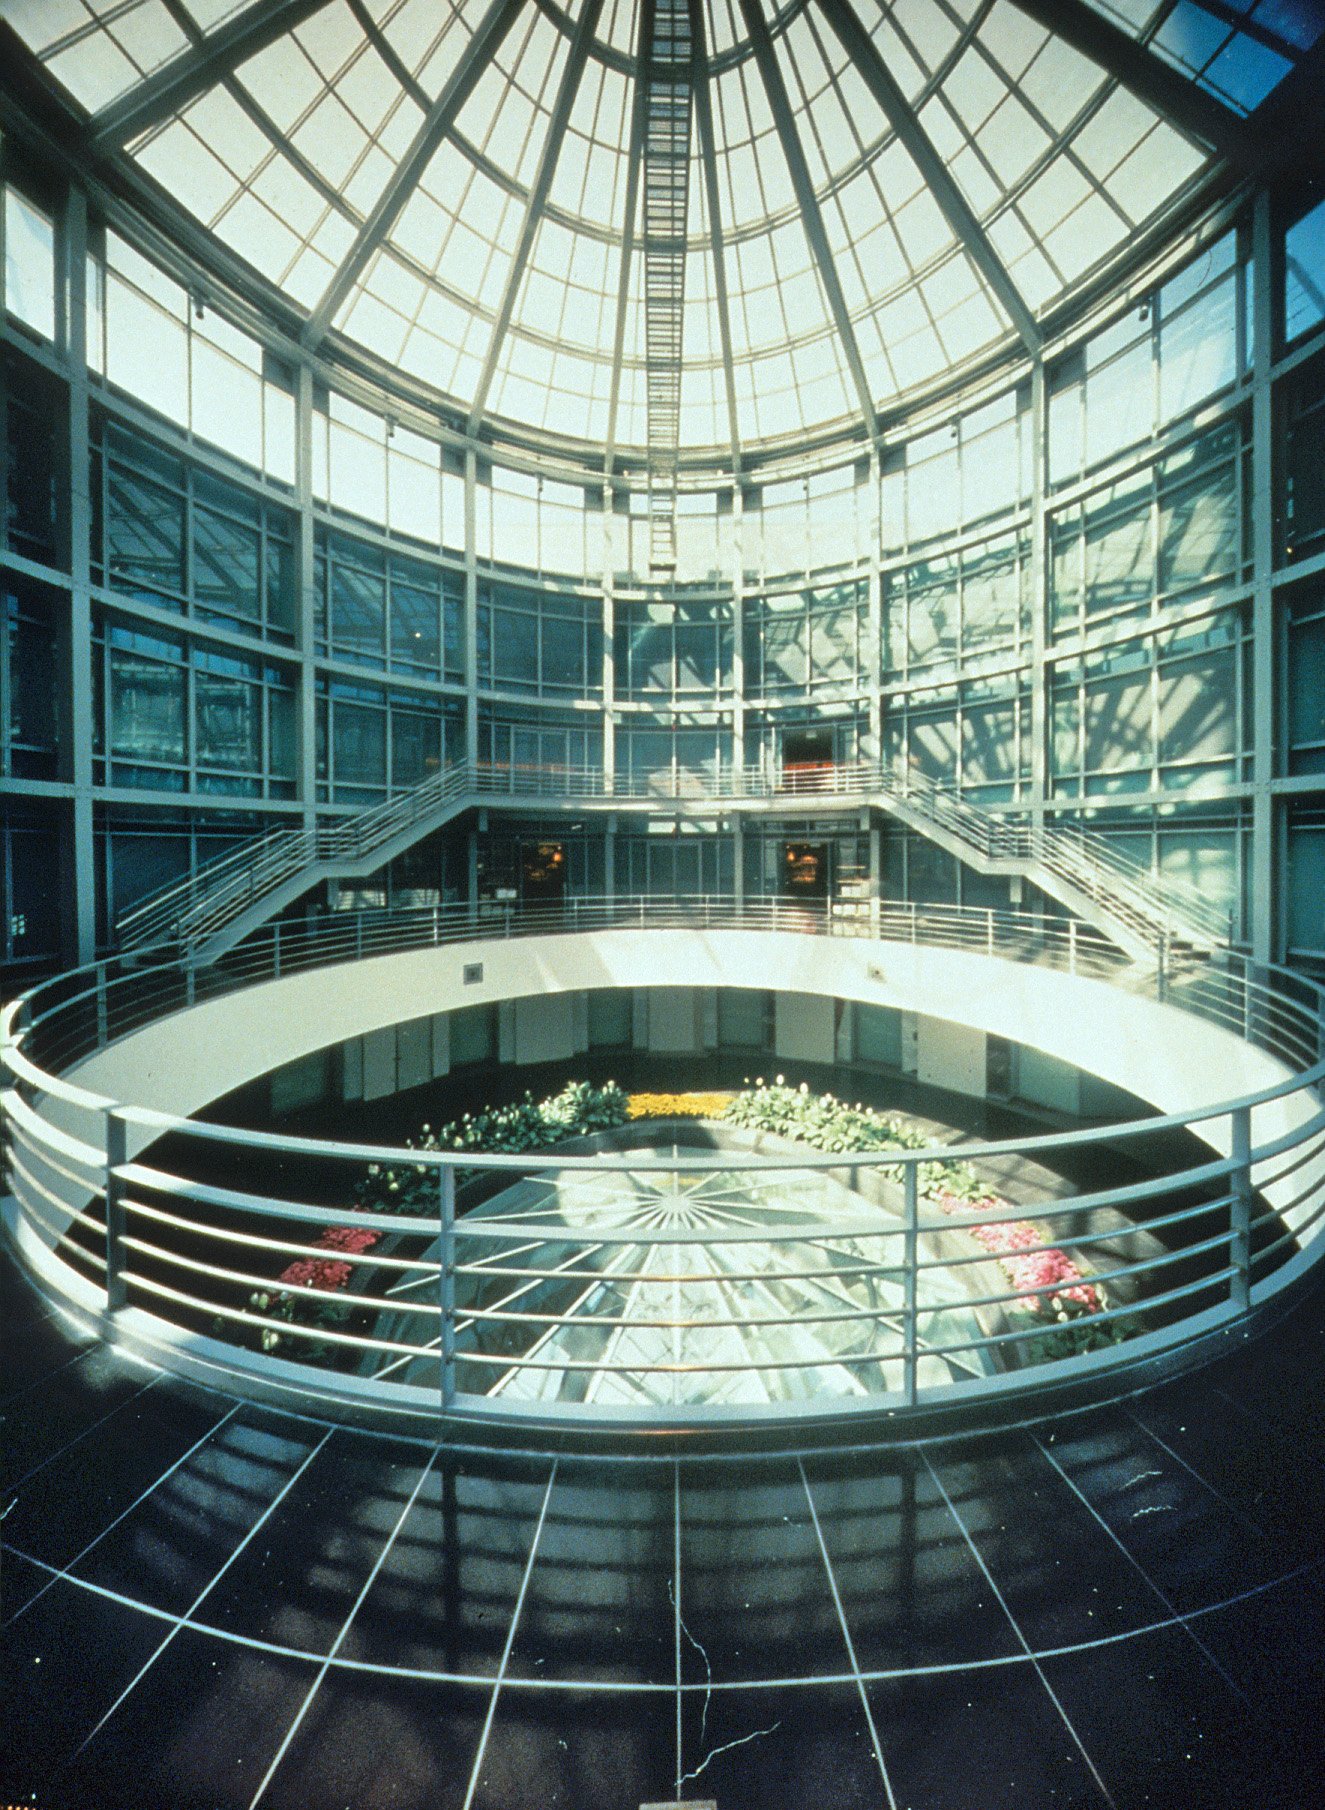  The atrium provides a food court and seating to tenants and the public. 